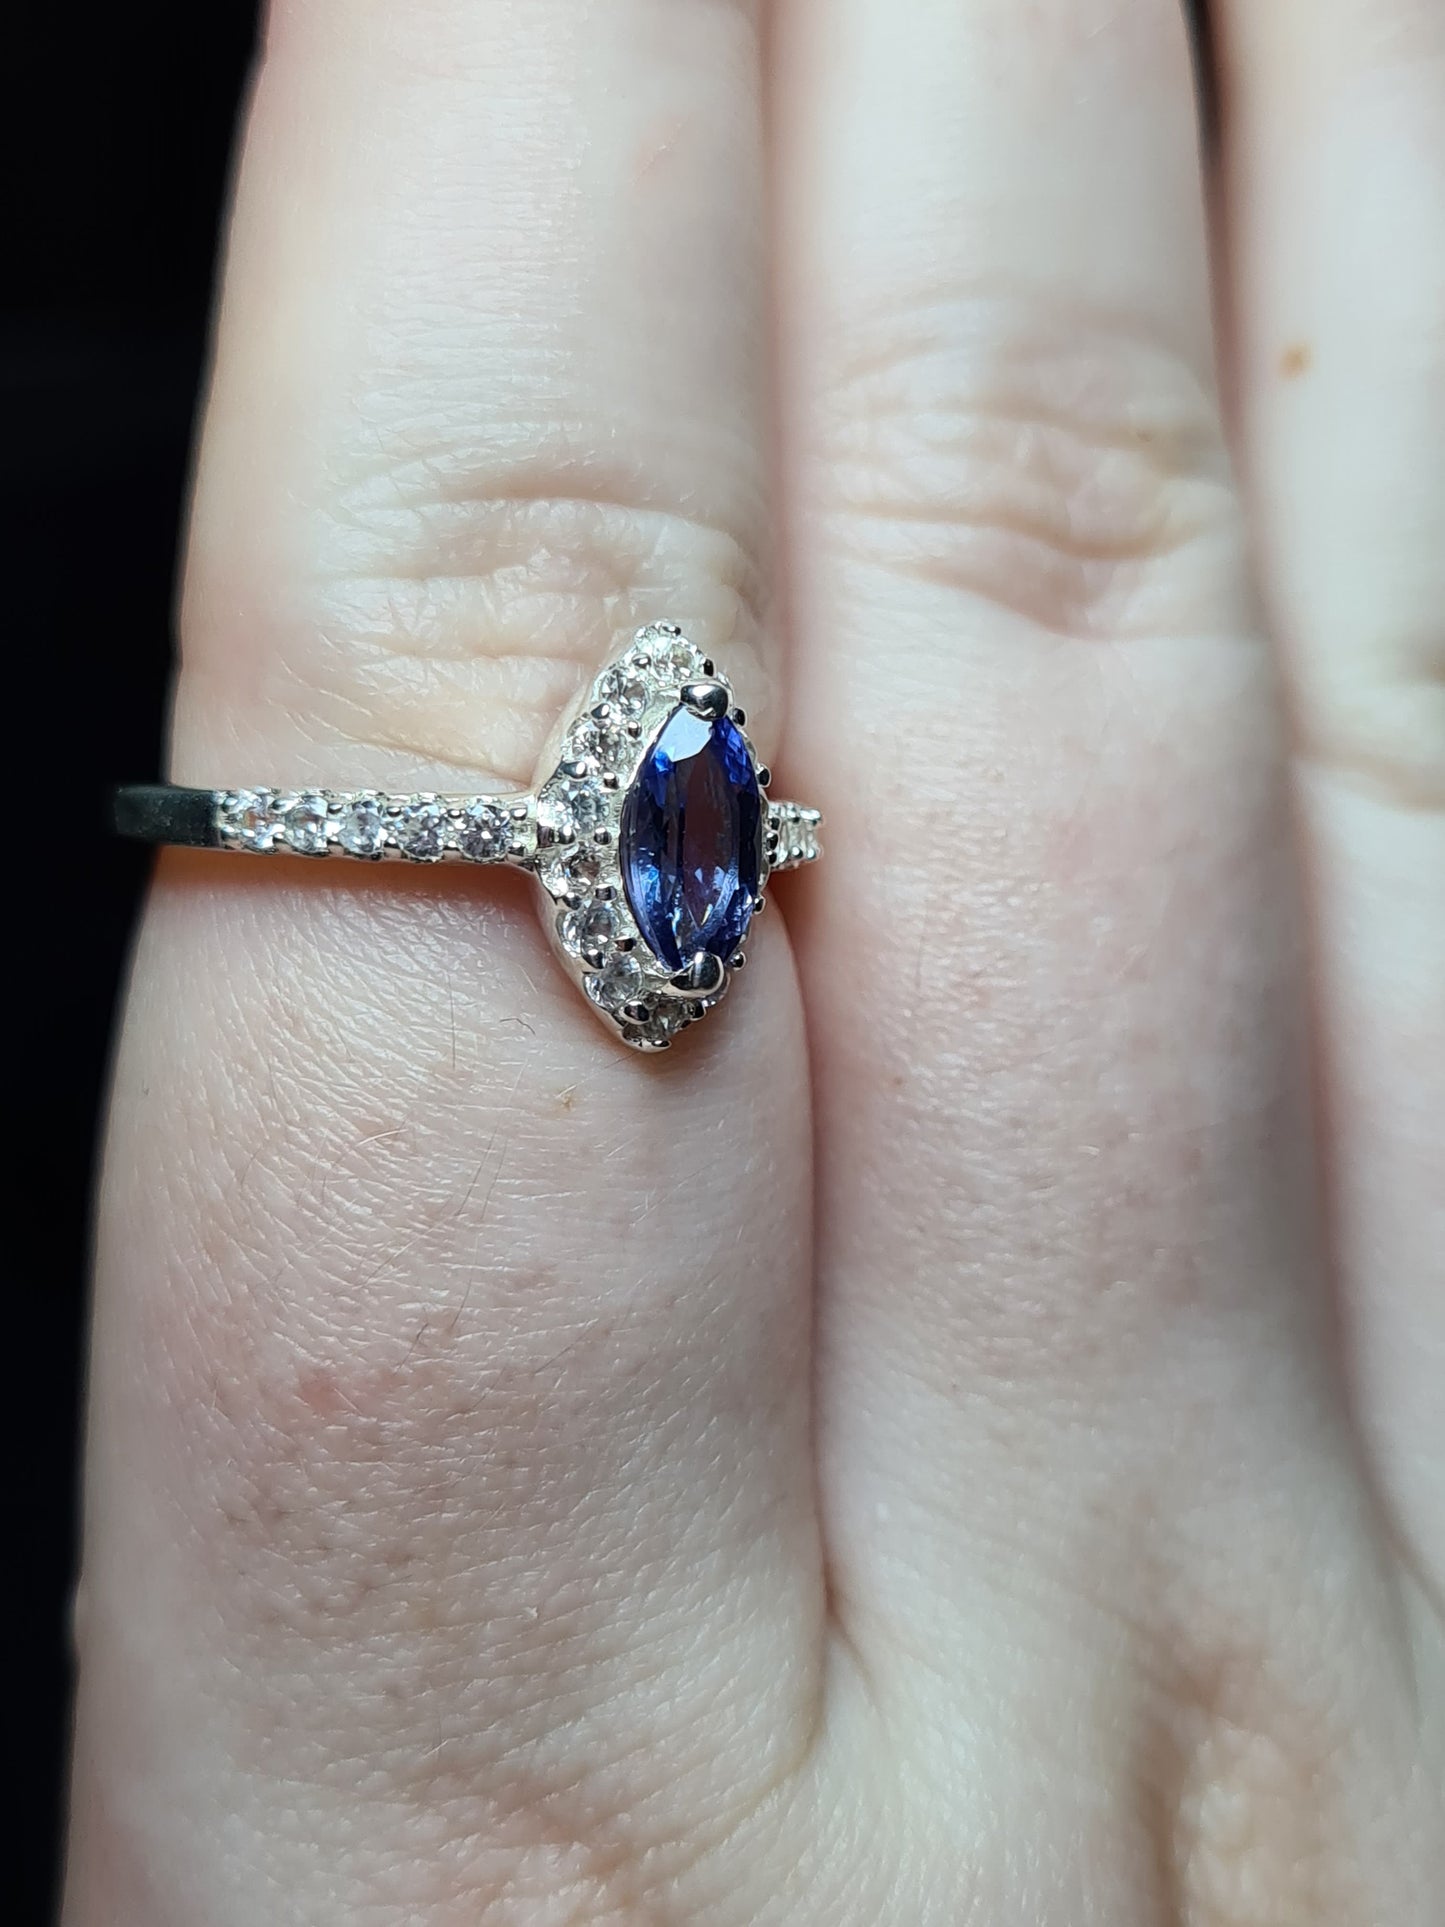 Marquise Cut Tanzanite and Natural Cambodian Zircon Ring in Sterling Silver SIZE O